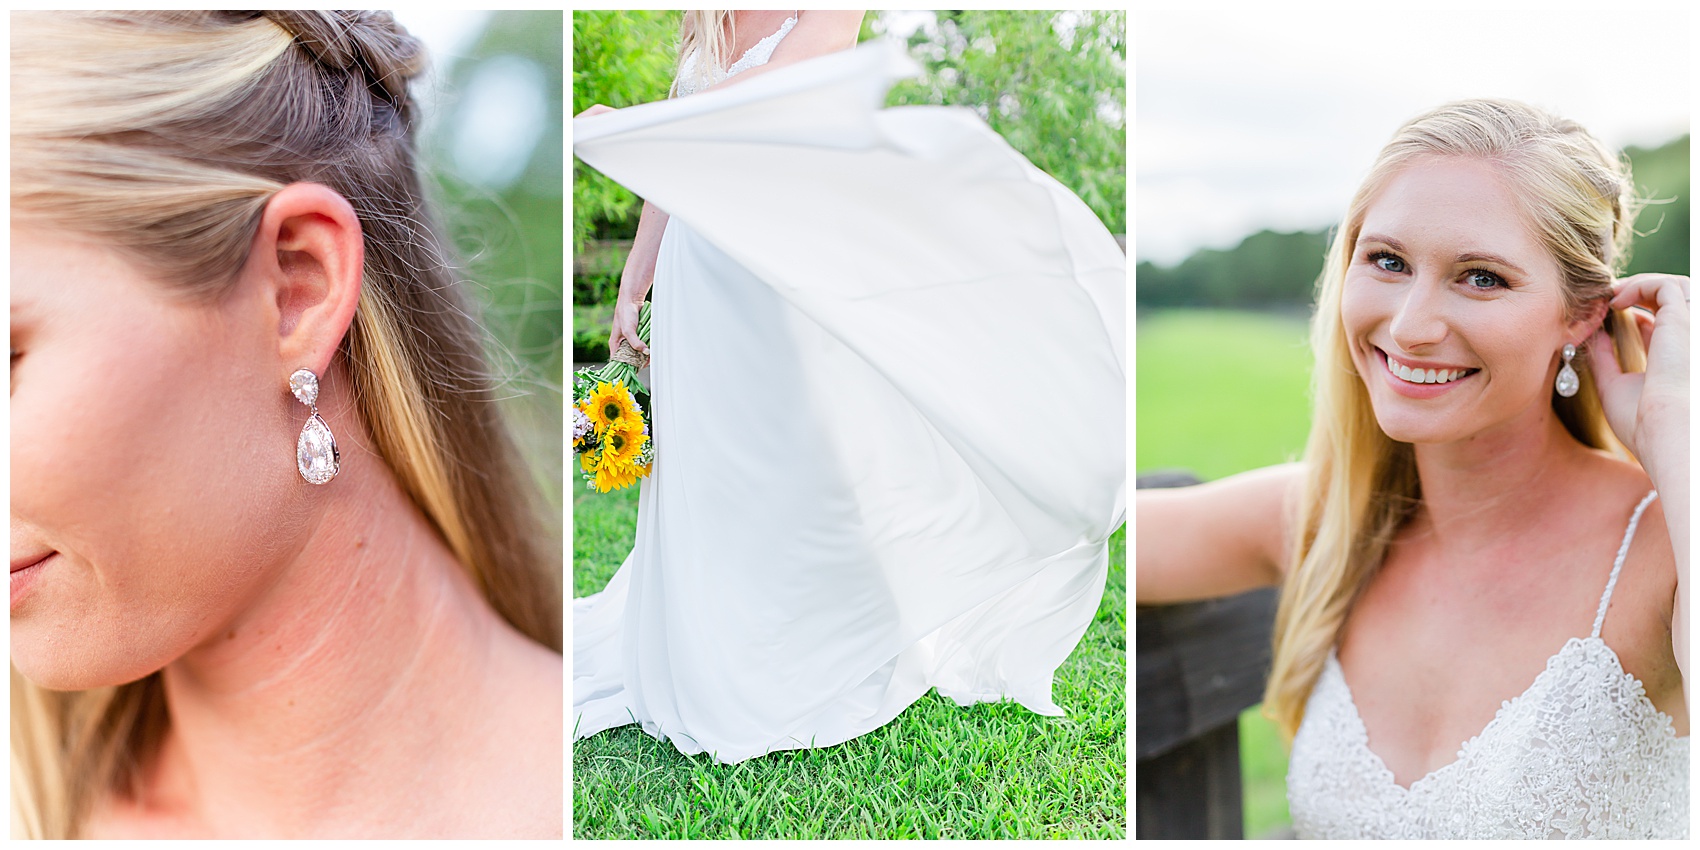 Pepper plantation bridal portraits - Danica flowing her dress in the wind